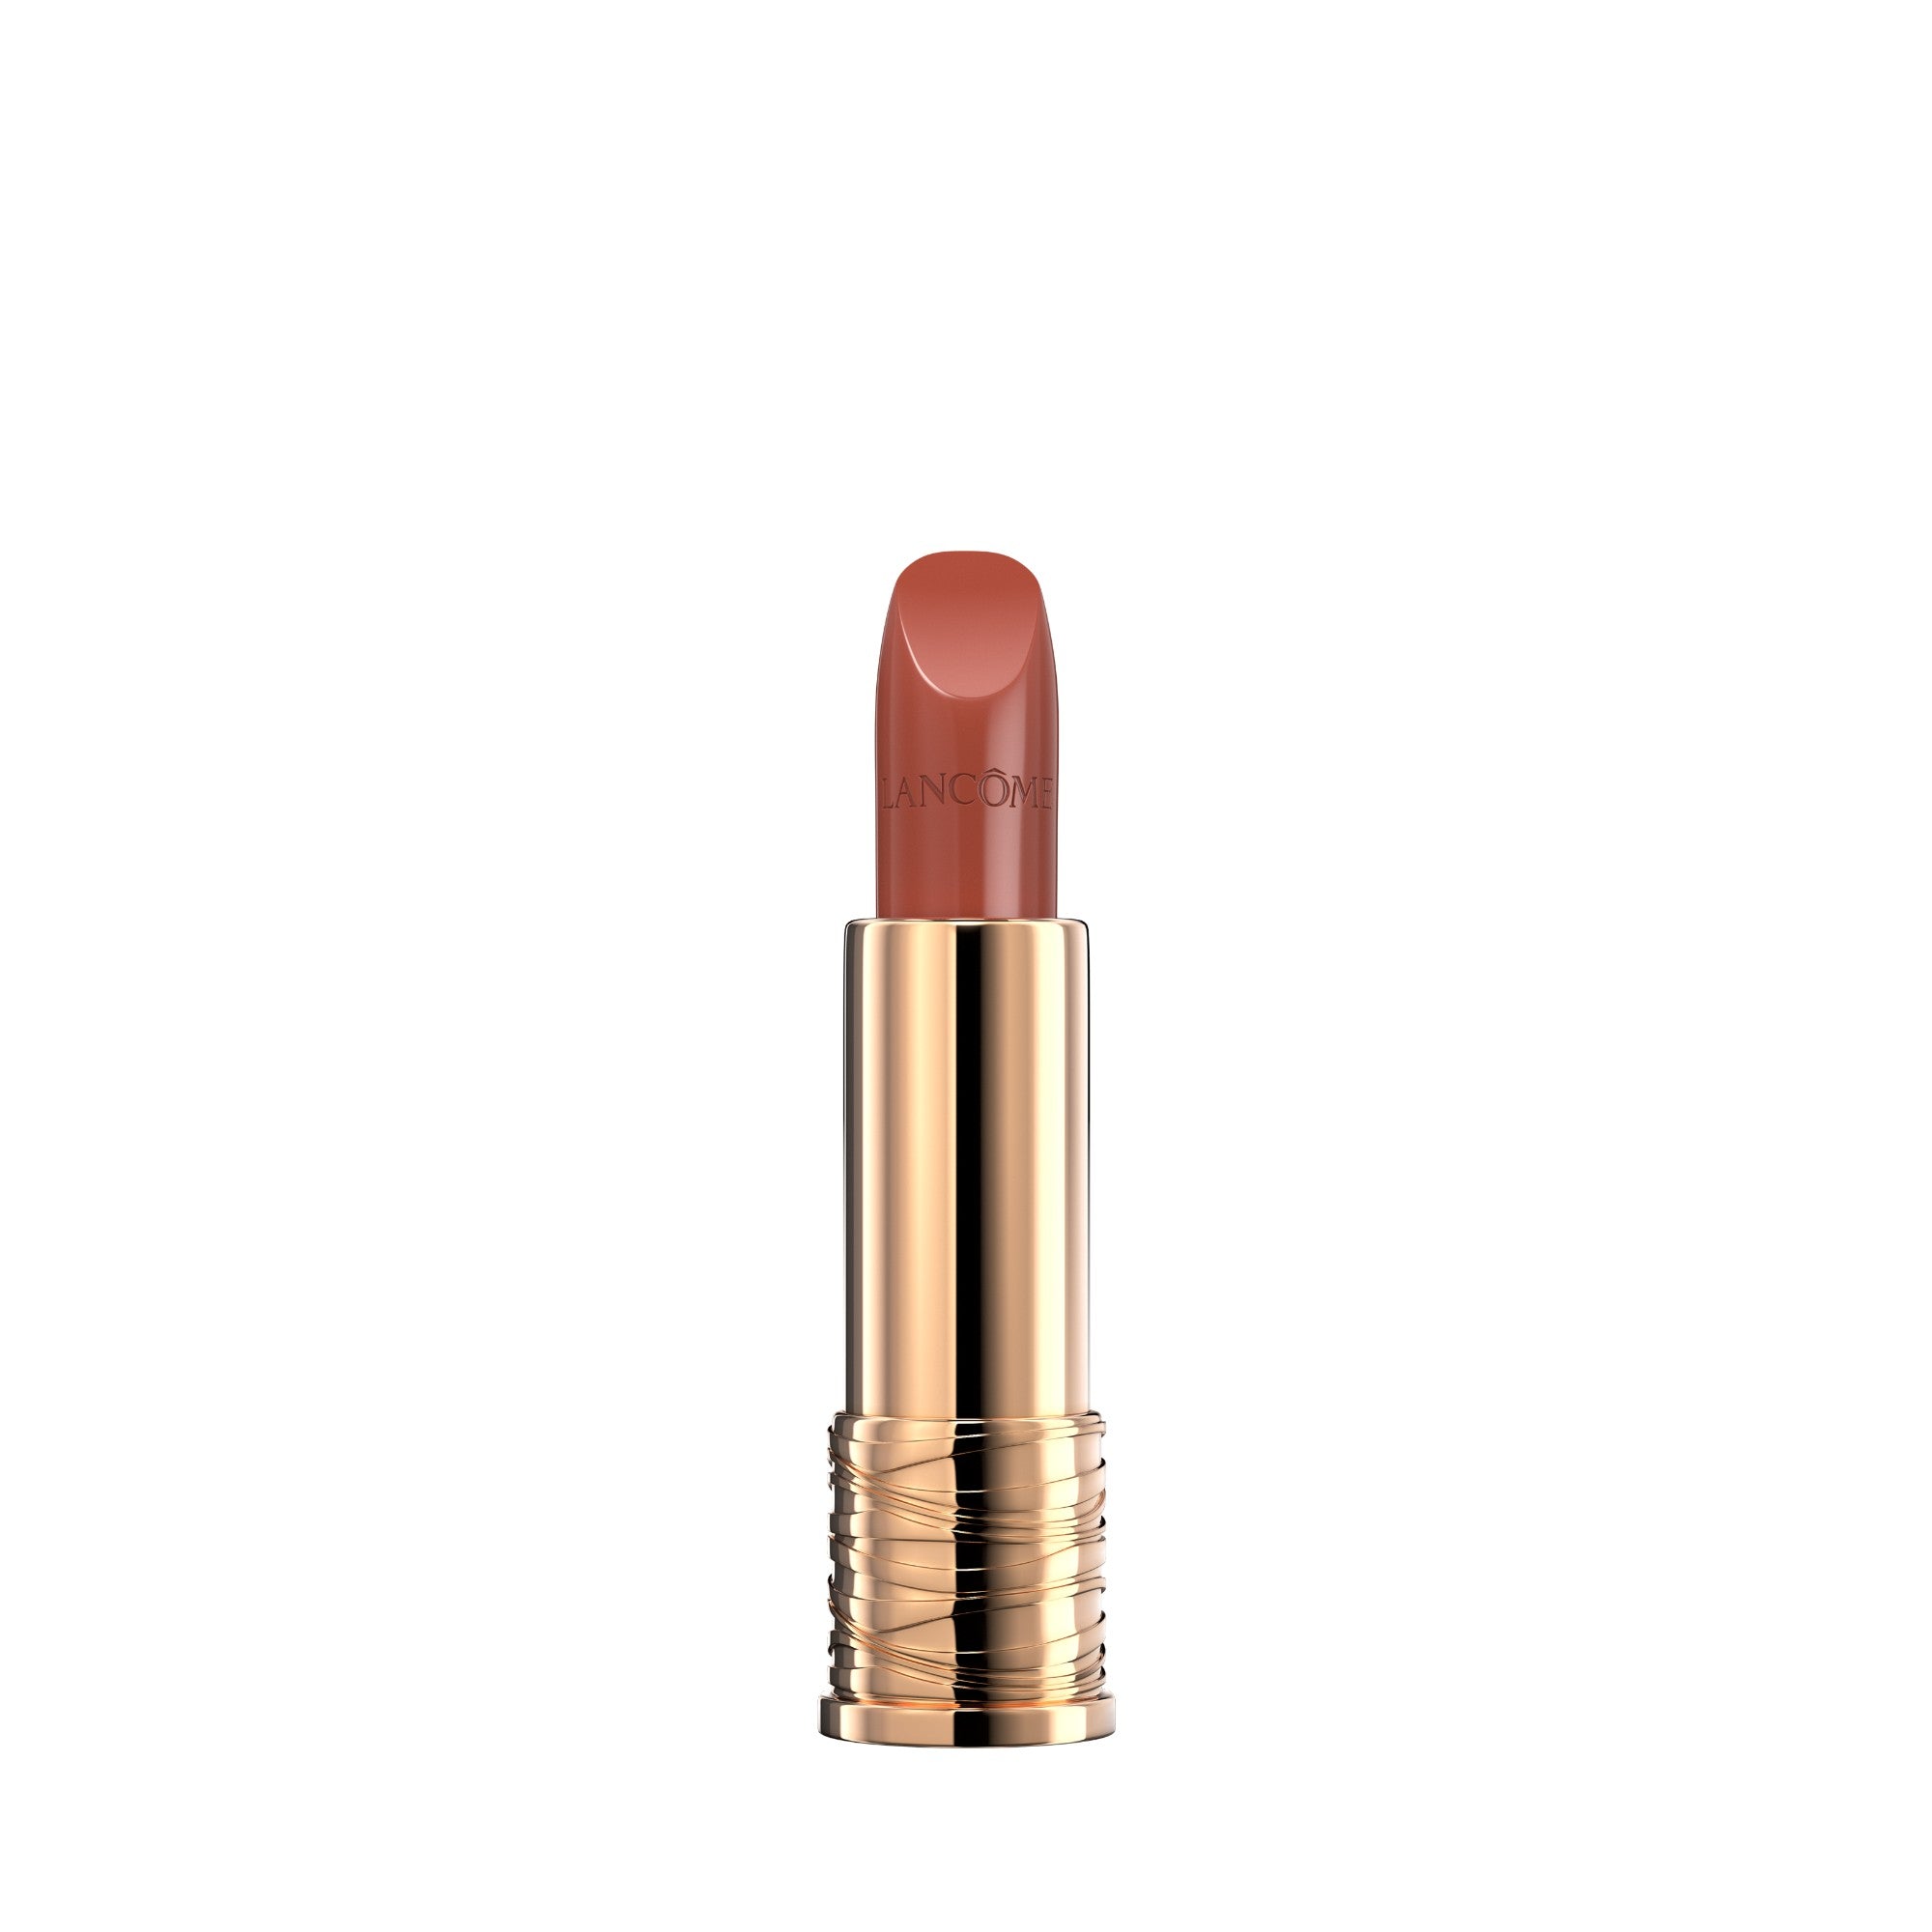 Lancome Absolu Rouge Cream Lipstick French Tea Only